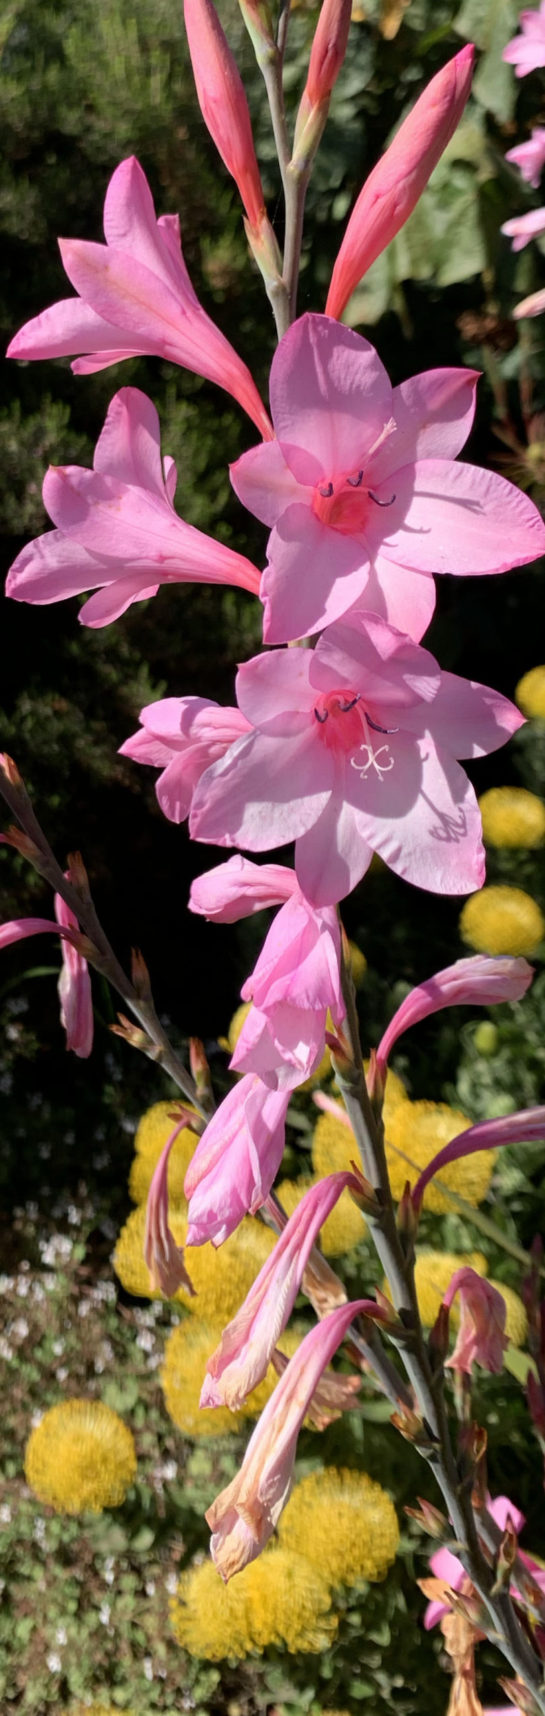 Image of Pink & Yellow Flowers